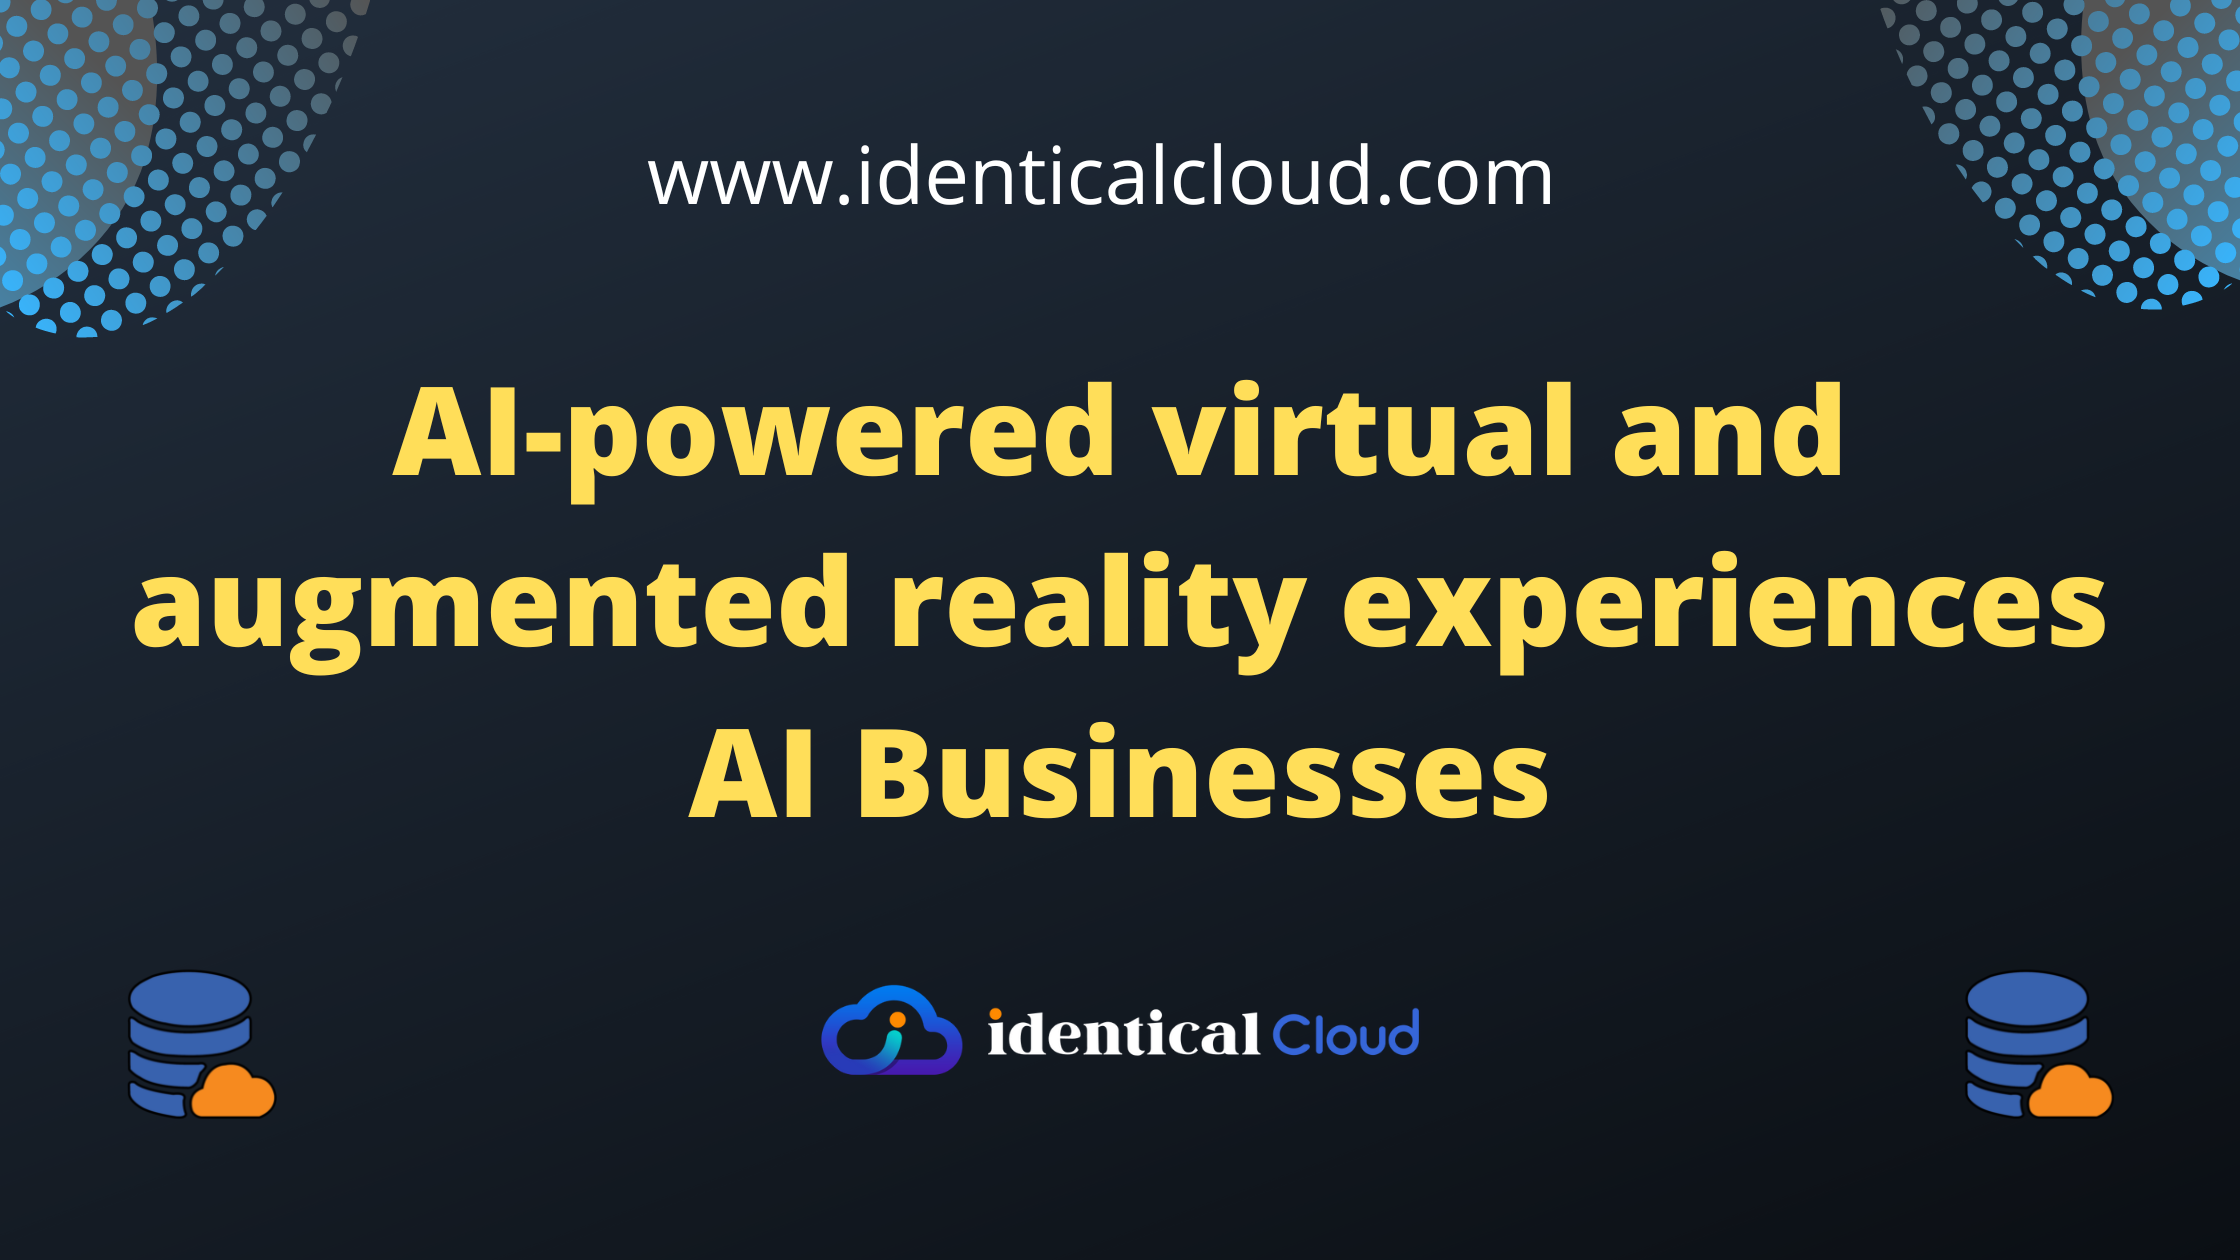 AI-powered virtual and augmented reality experiences AI Businesses - identicalcloud.com